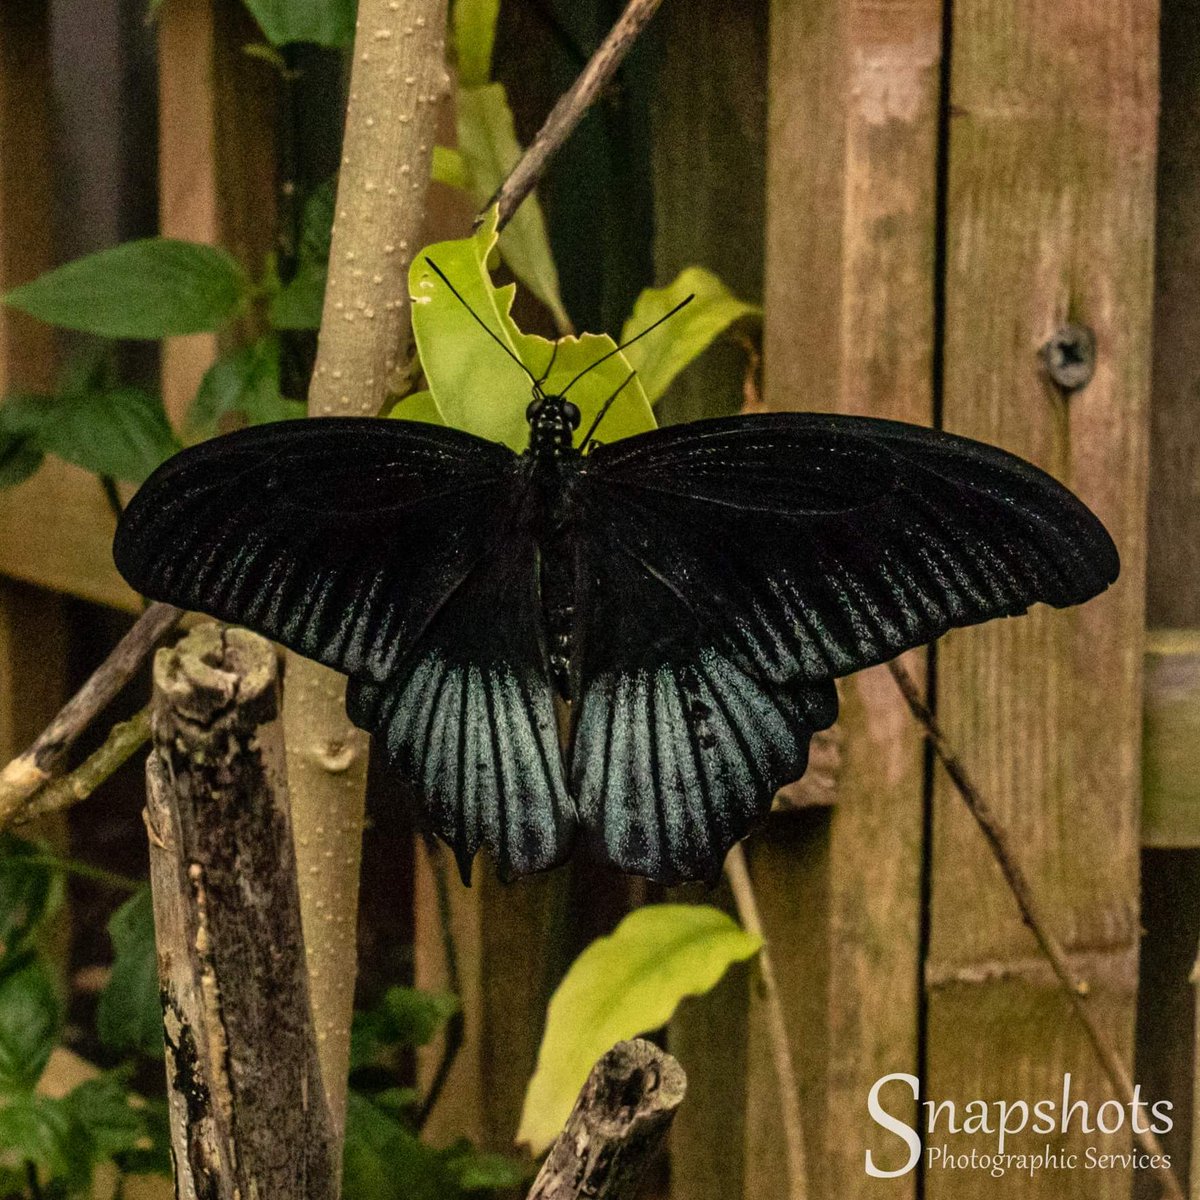 Day 272 - Another butterfly

#day272 #365dayphotochallenge #photooftheday #CanonEOS80D📷 #snapshotsps #snapshotsPhoto5 #photographicrestorations #creativephotography #butterfly #canonEF2470F4L #stratfordbutterflyfarm